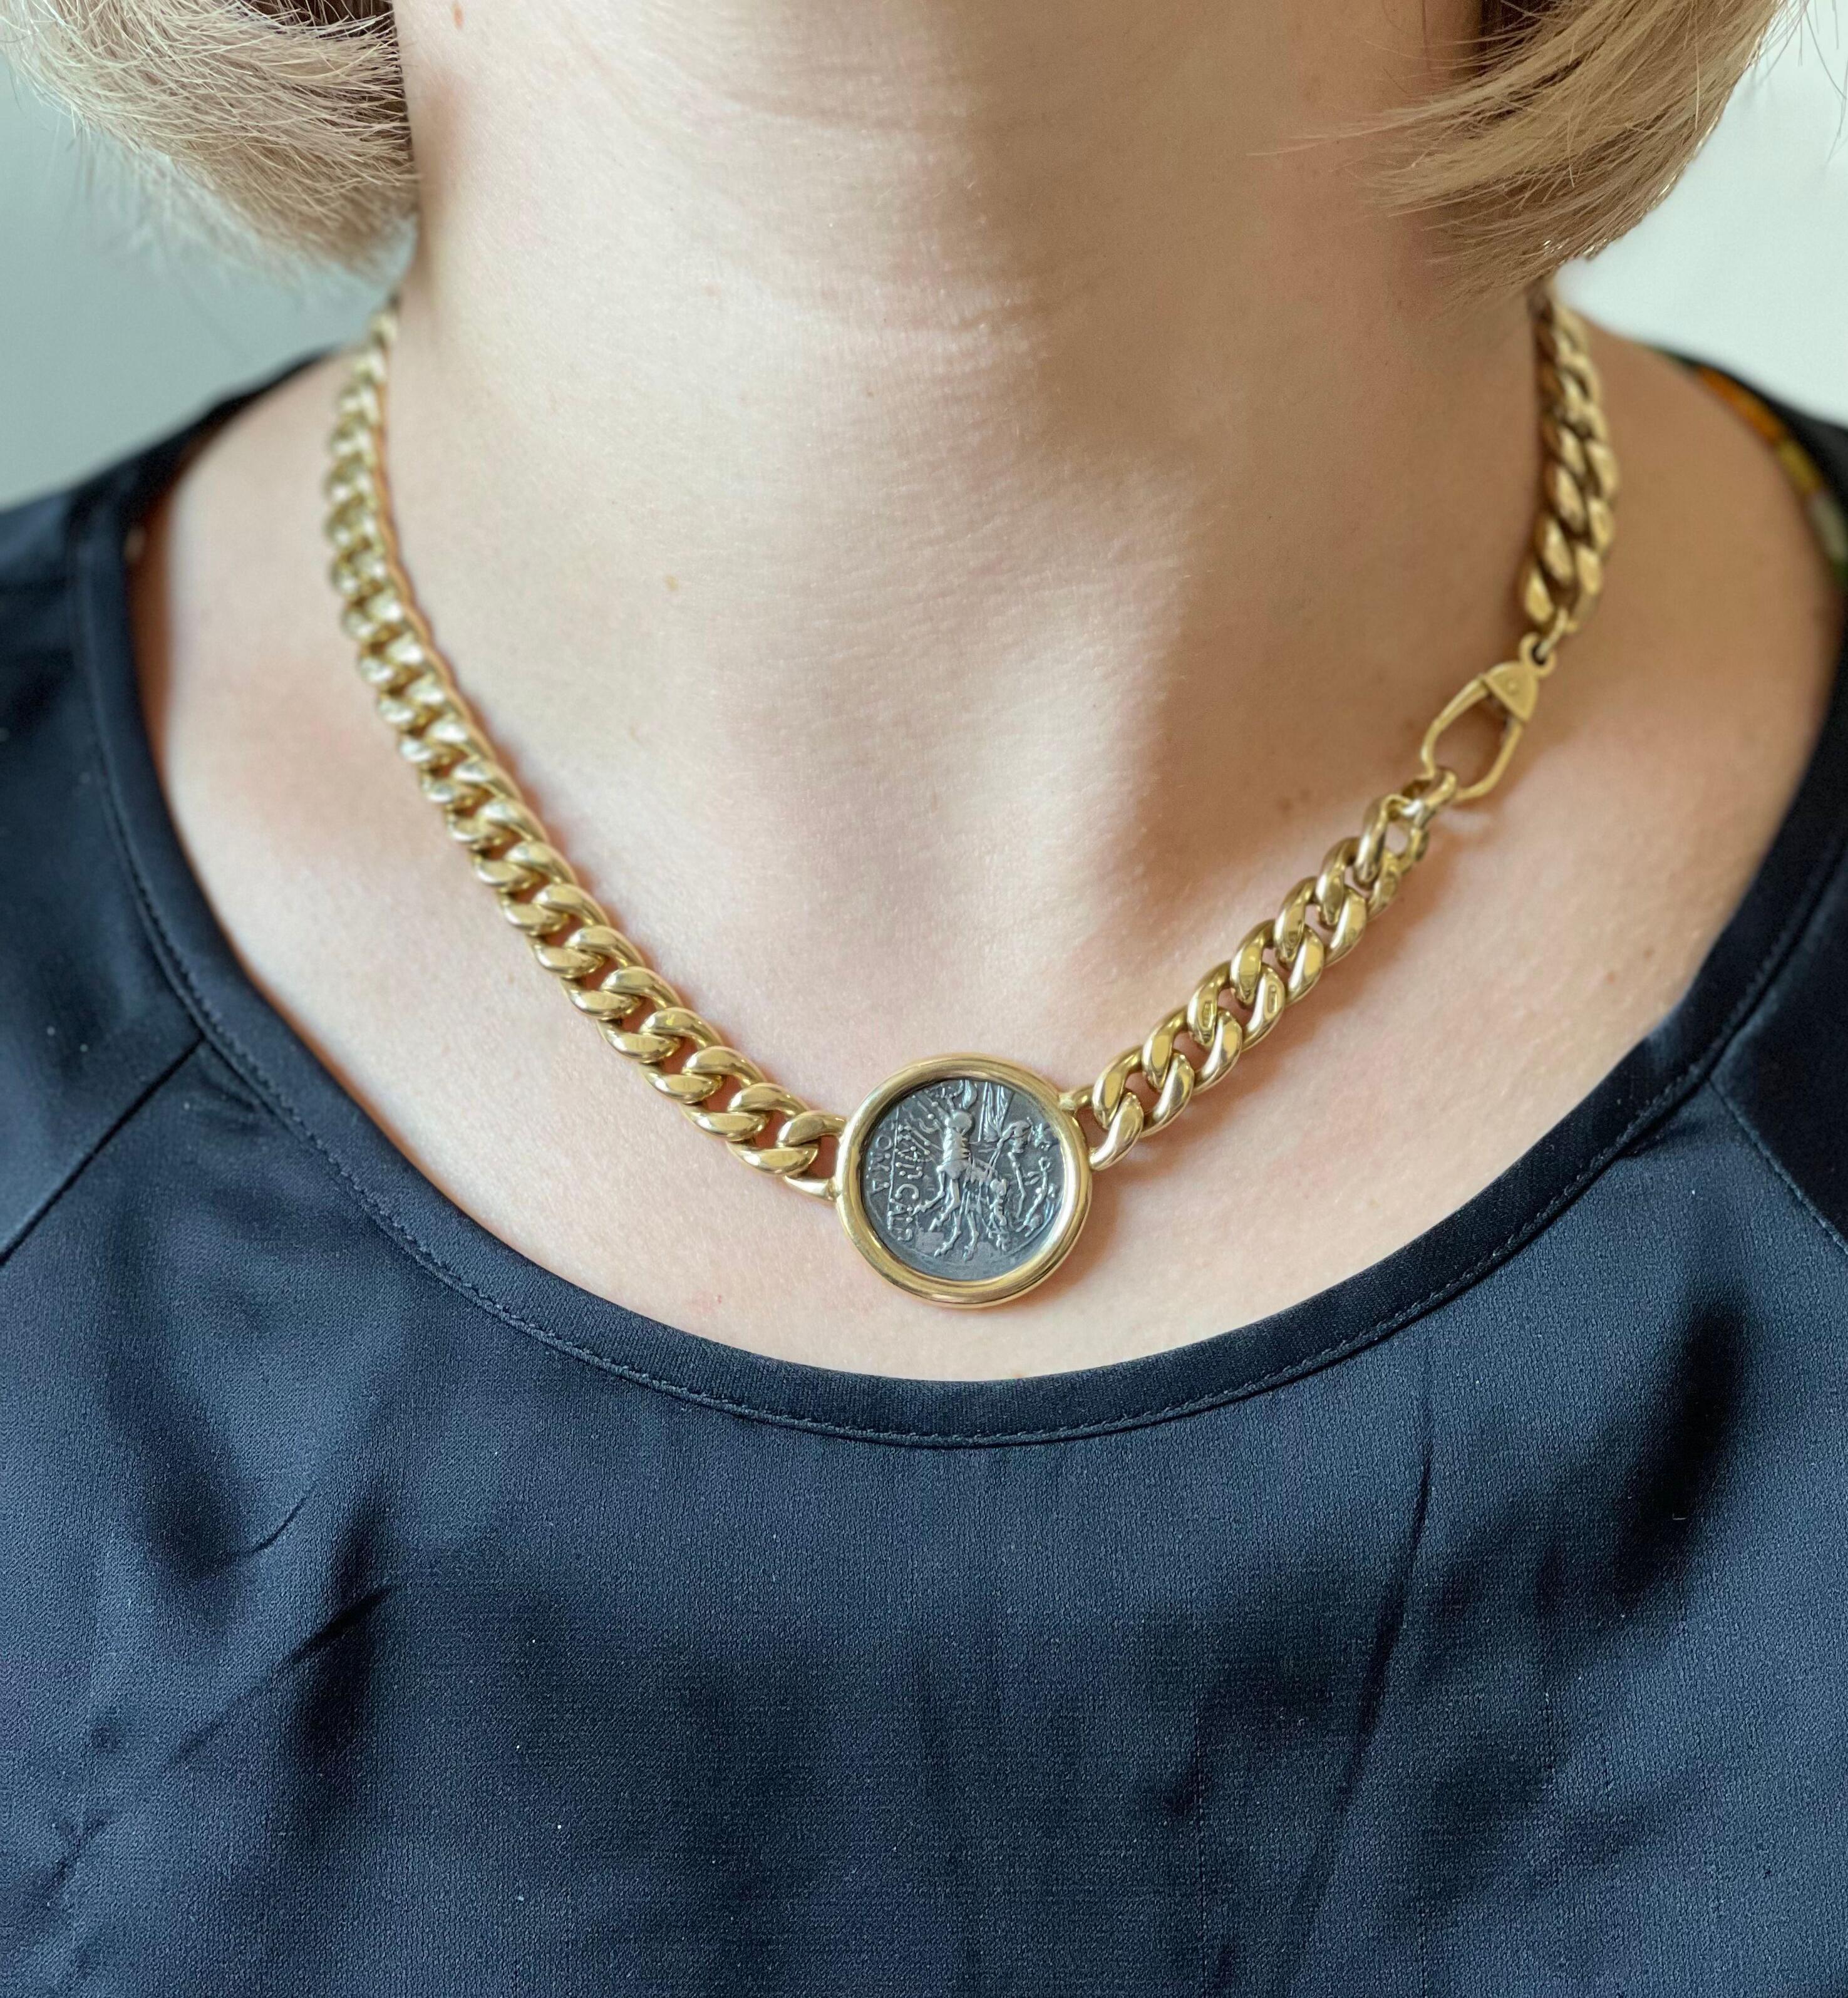 F. Moroni 18k gold curb link chain necklace, featuring bezel set ancient Roman empire coin in the center. Necklace is 17